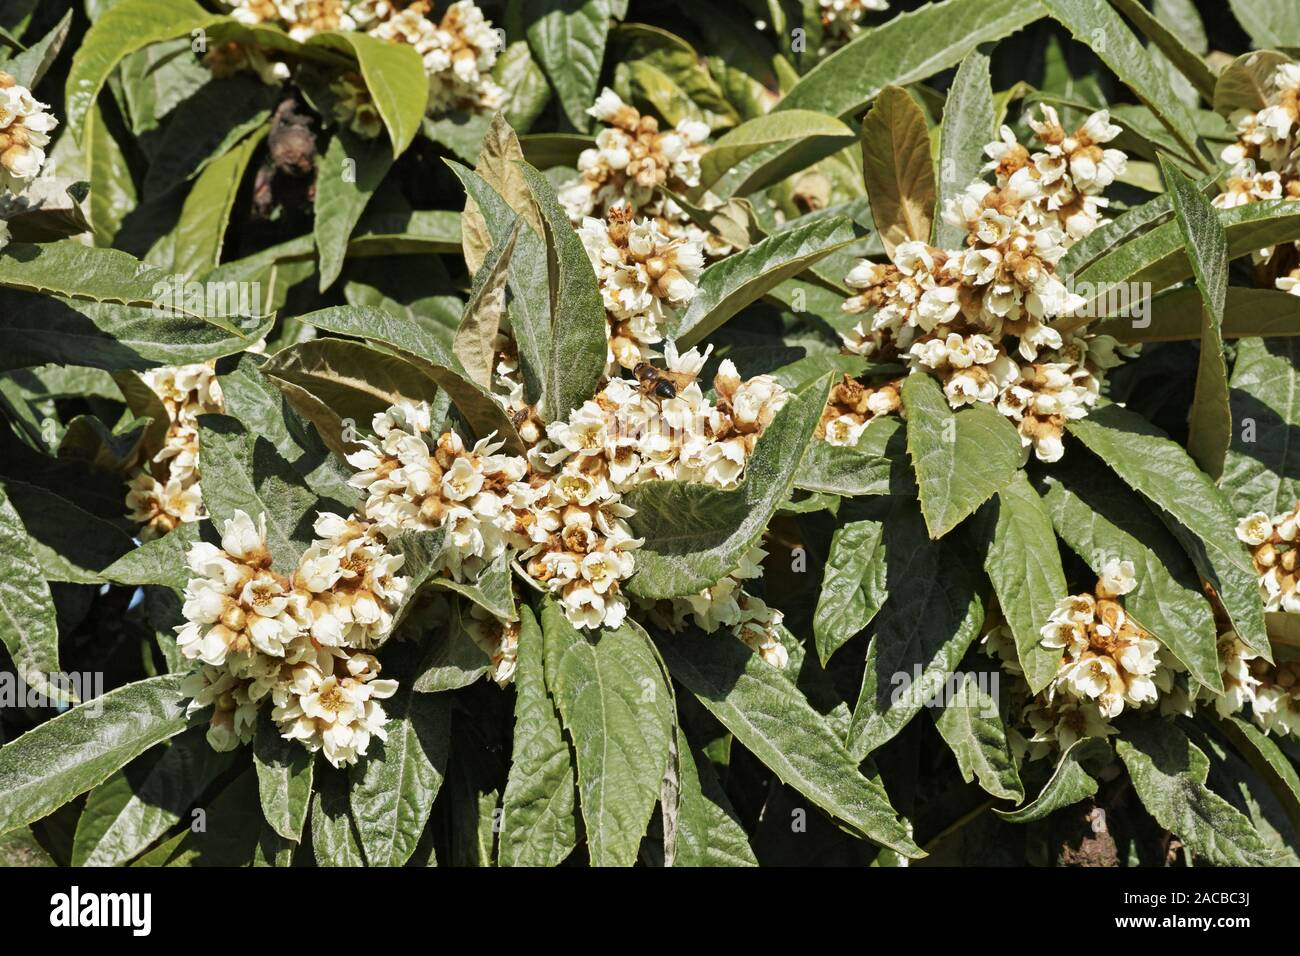 detail of the crown of loquat tree, flowers and leaves Stock Photo